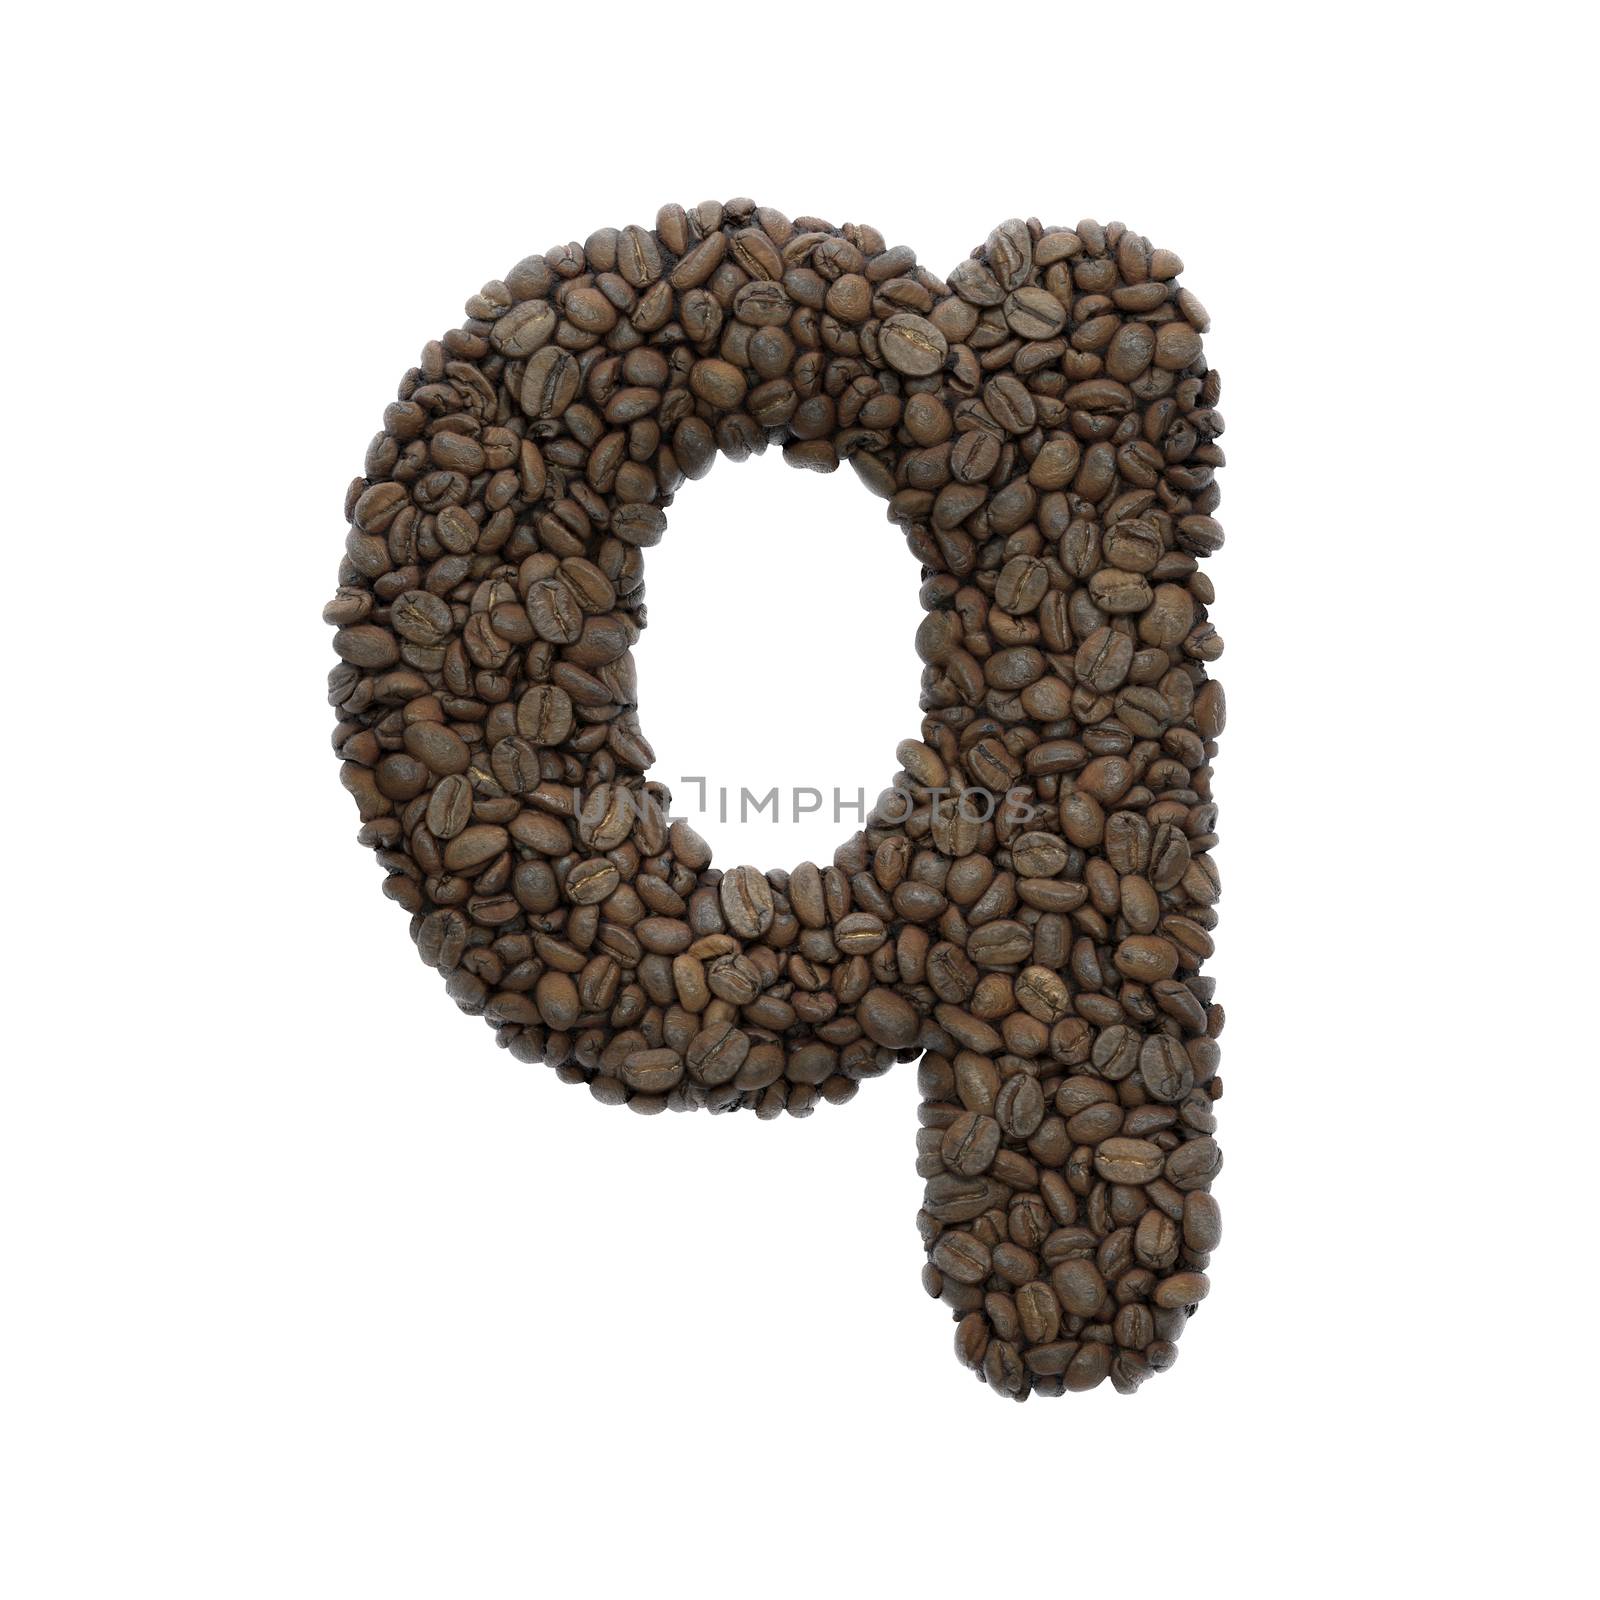 Coffee letter Q - Small 3d roasted beans font isolated on white background. This alphabet is perfect for creative illustrations related but not limited to Coffee, energy, insomnia...